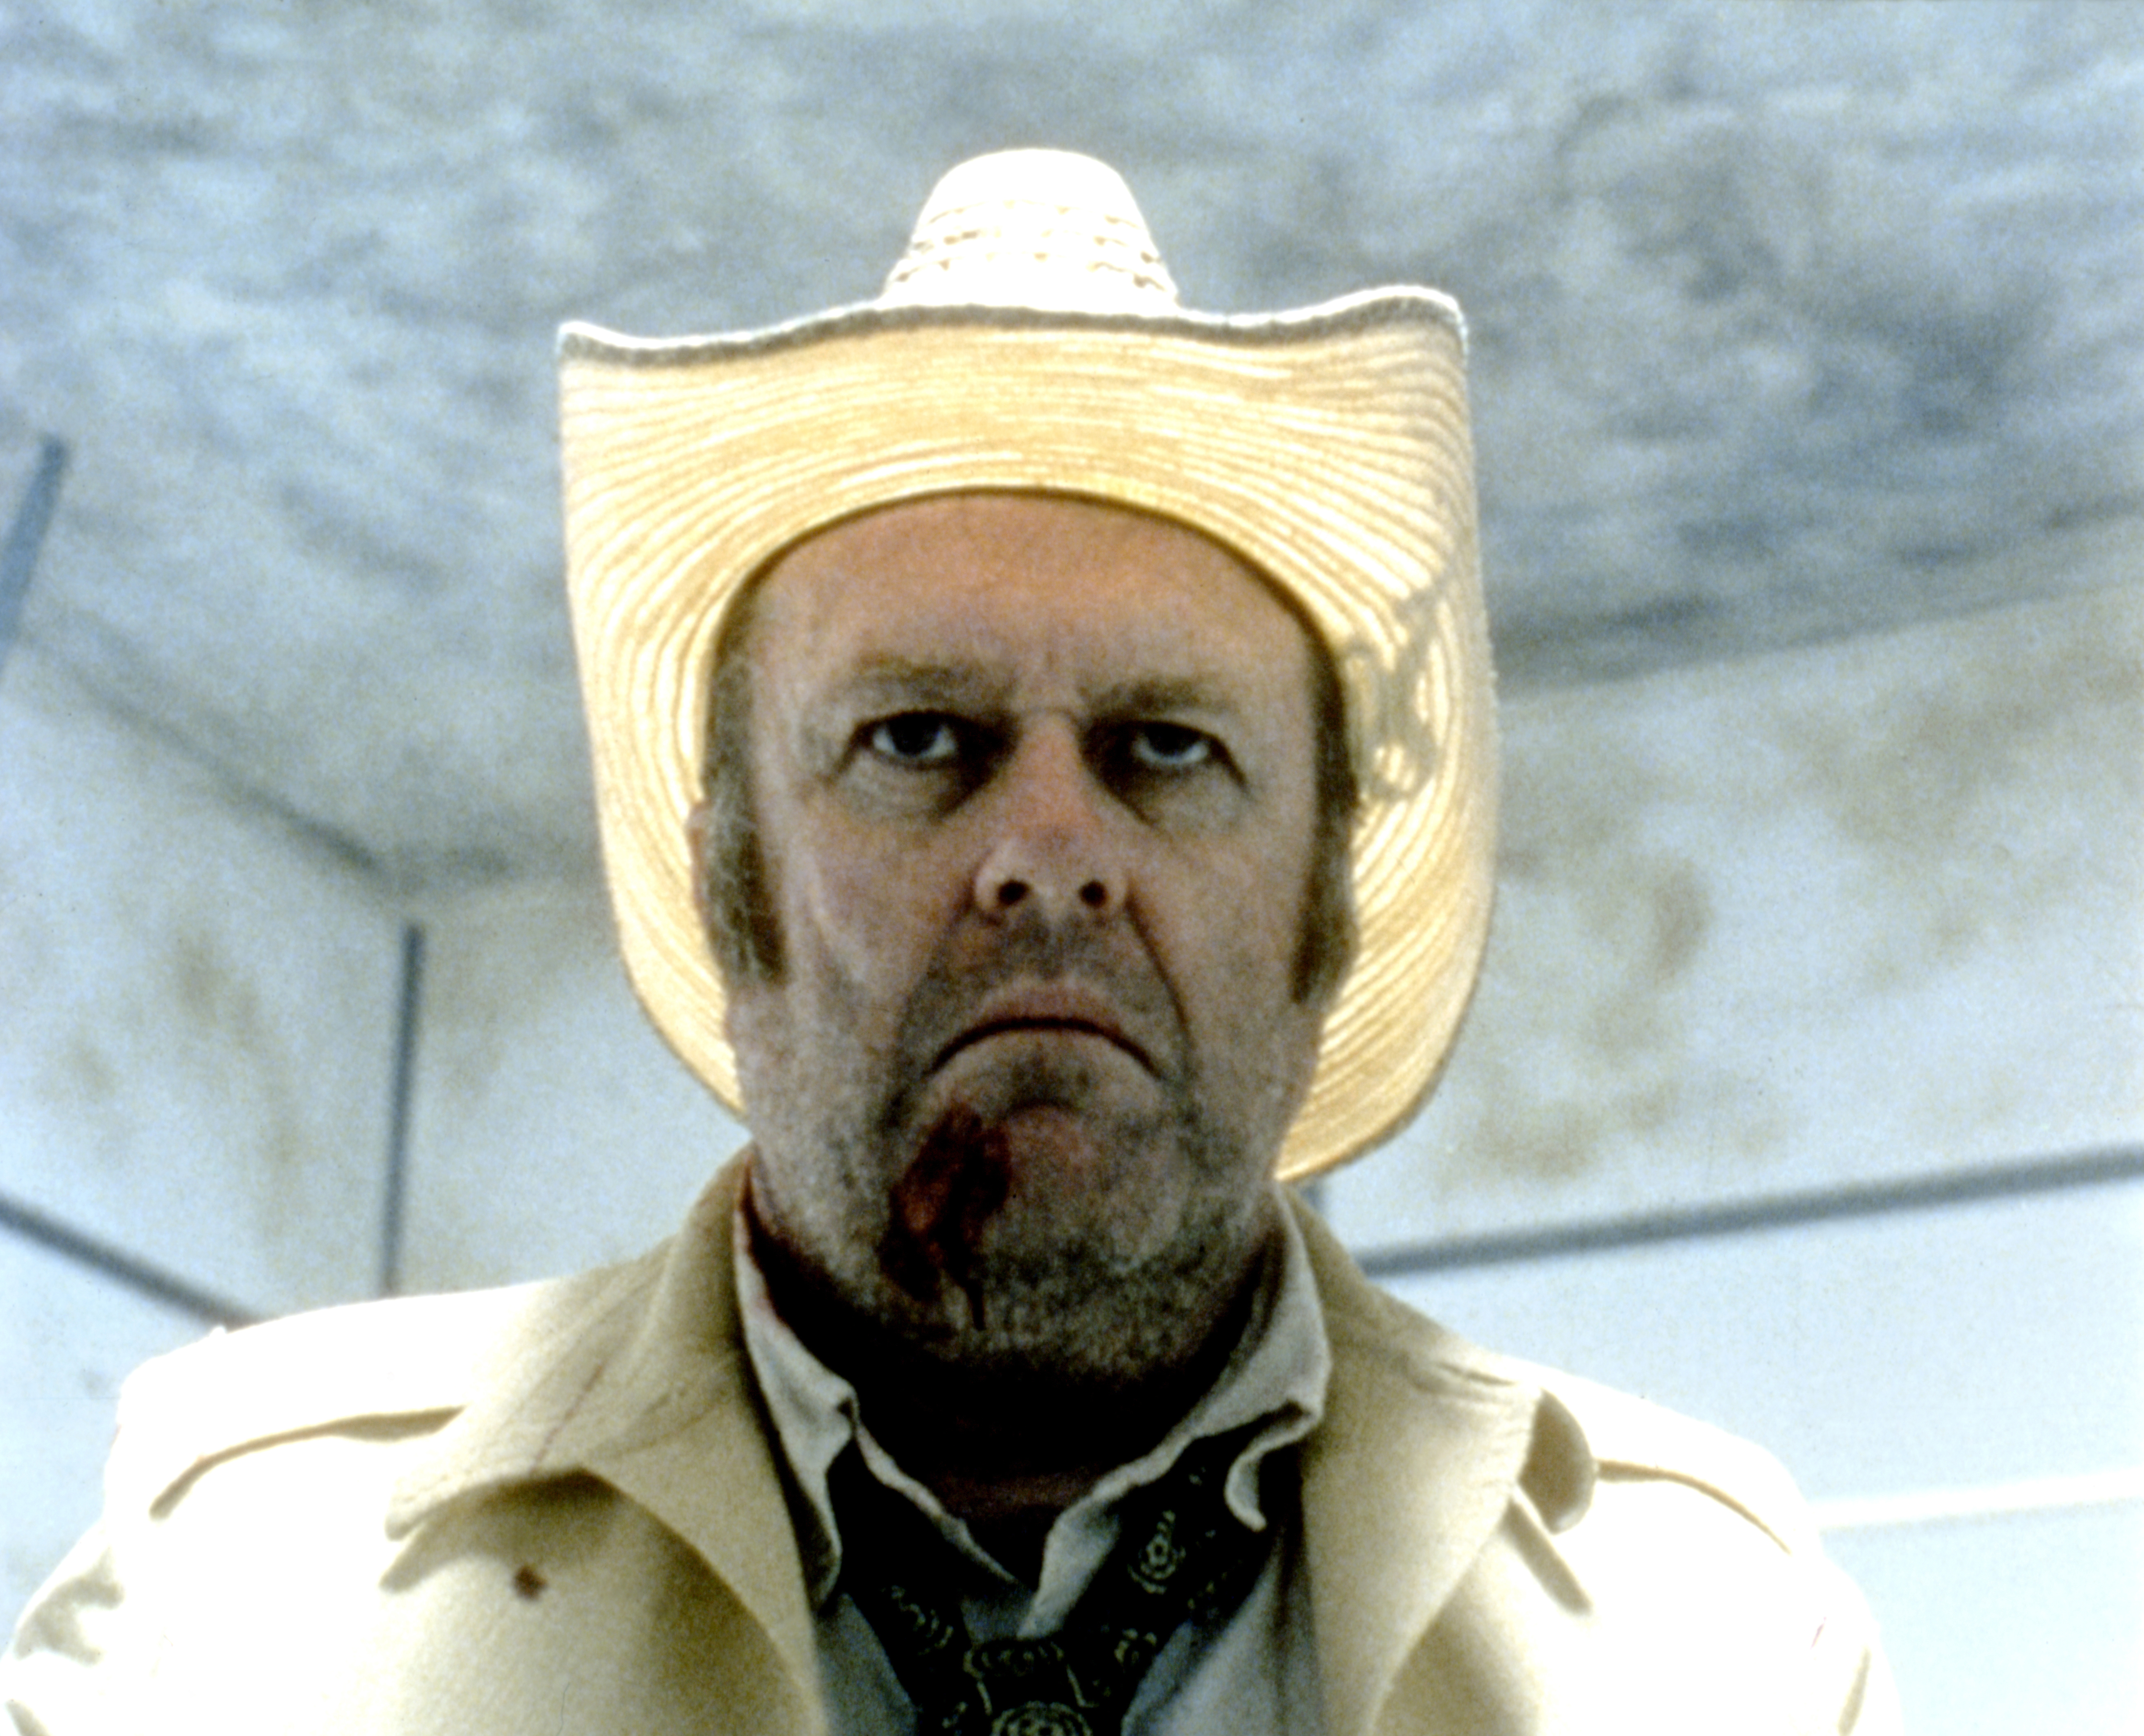 M Emmet Walsh in the film "Blood Simple." | Source: Getty Images